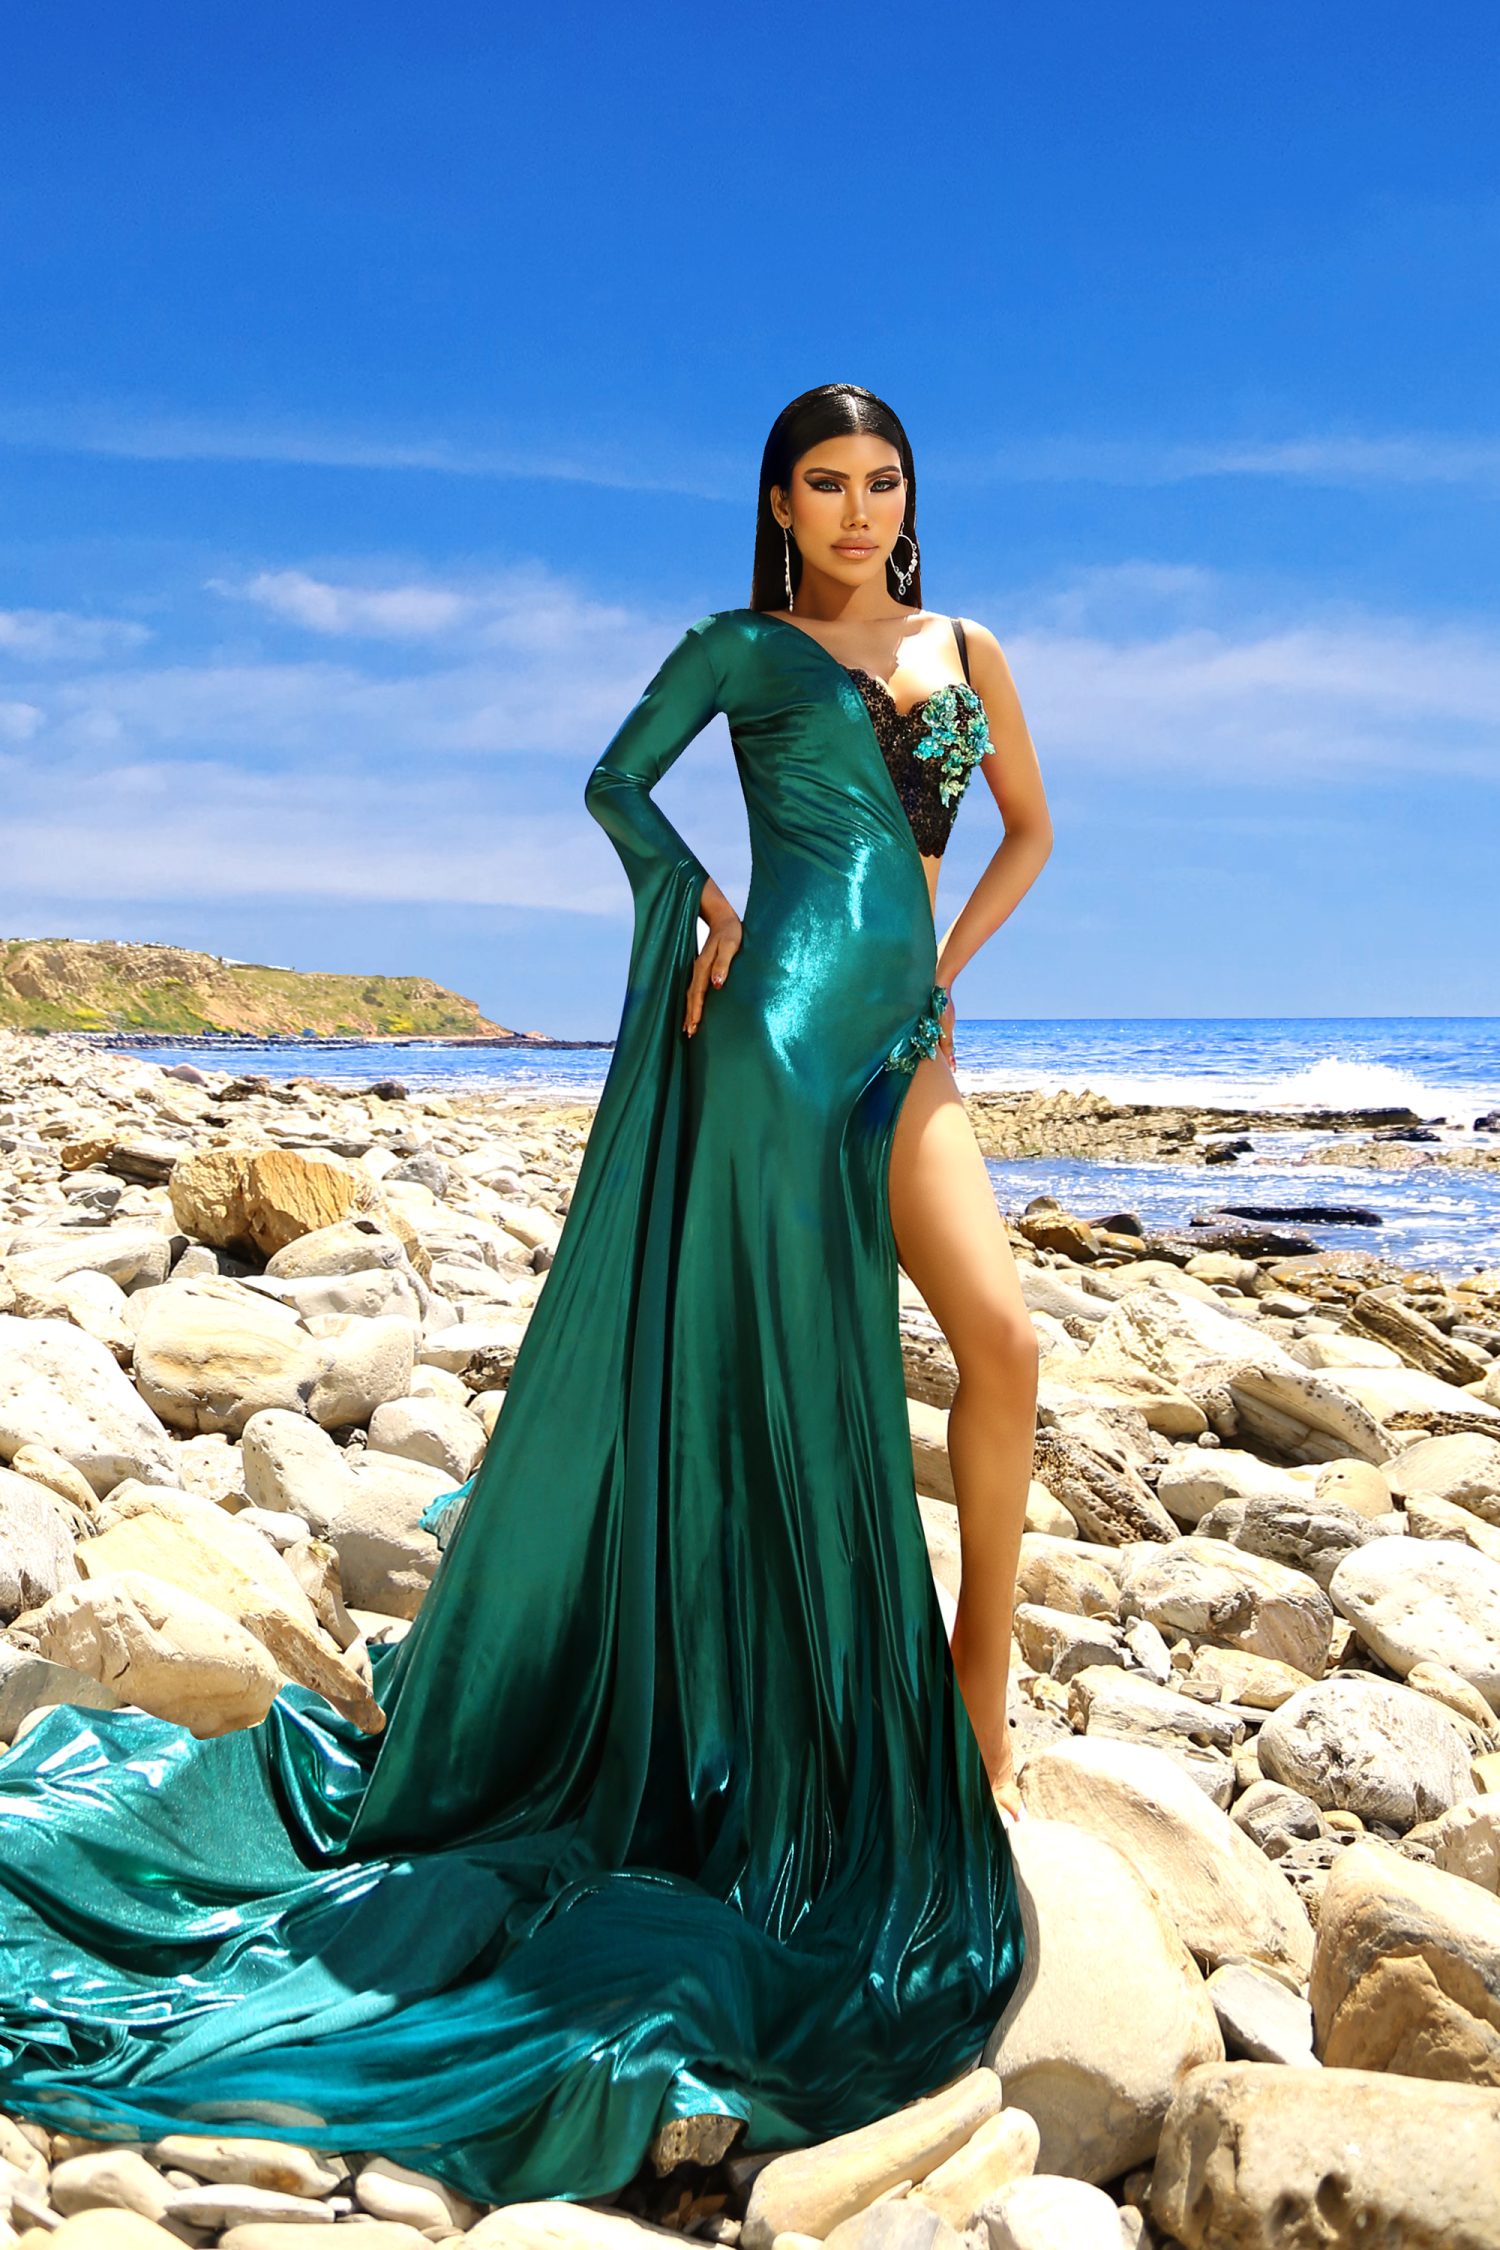 Two Piece Mermaid Gown The Shiny Sheer Senorita mermaid gown is a sartorial treasure that redefines elegance. This two piece marvel, with its form-fitting emerald green bodice and flowing black skirt, creates a silhouette that celebrates the female form. The mermaid cut of the gown flares at the knee, mimicking the graceful curves of oceanic tales, while the spandex material ensures a perfect fit that accentuates your natural grace. Long Sleeve One Shoulder Cape Draped over one shoulder, the long sleeve cape adds a touch of drama and sophistication to the ensemble. This floor-grazing element of design brings a regal air to the gown, its sheer fabric billowing like a banner of nobility. It is a modern nod to the capes of yesteryears, reimagined for the contemporary goddess. Crystal Beadwork The gown’s bodice is a canvas for the exquisite crystal beadwork that adorns it. Handcrafted with precision, the beads catch the light and twinkle like stars against the night sky. The intricate patterns formed by the crystals are reminiscent of delicate butterfly wings, adding a fantastical element to the gown’s overall design. Double Strap Built-in Bra Functionality meets fashion with the gown’s double strap built-in bra. This feature provides support without sacrificing style, allowing for a seamless look under the sheer fabric. The hand-beaded straps are not just structural elements but also key details that contribute to the gown’s luxurious aesthetic. Senorita, A Devon Couture by Jannat Akhi Every stitch of this gown speaks of the artistry and vision of Devon Couture by Jannat Akhi. Known for creating pieces that are both innovative and timeless, Jannat Akhi’s designs are a celebration of individuality and elegance. The Shiny Sheer Senorita gown, with its blend of boldness and beauty, is a testament to the brand’s dedication to fashion as a form of art.